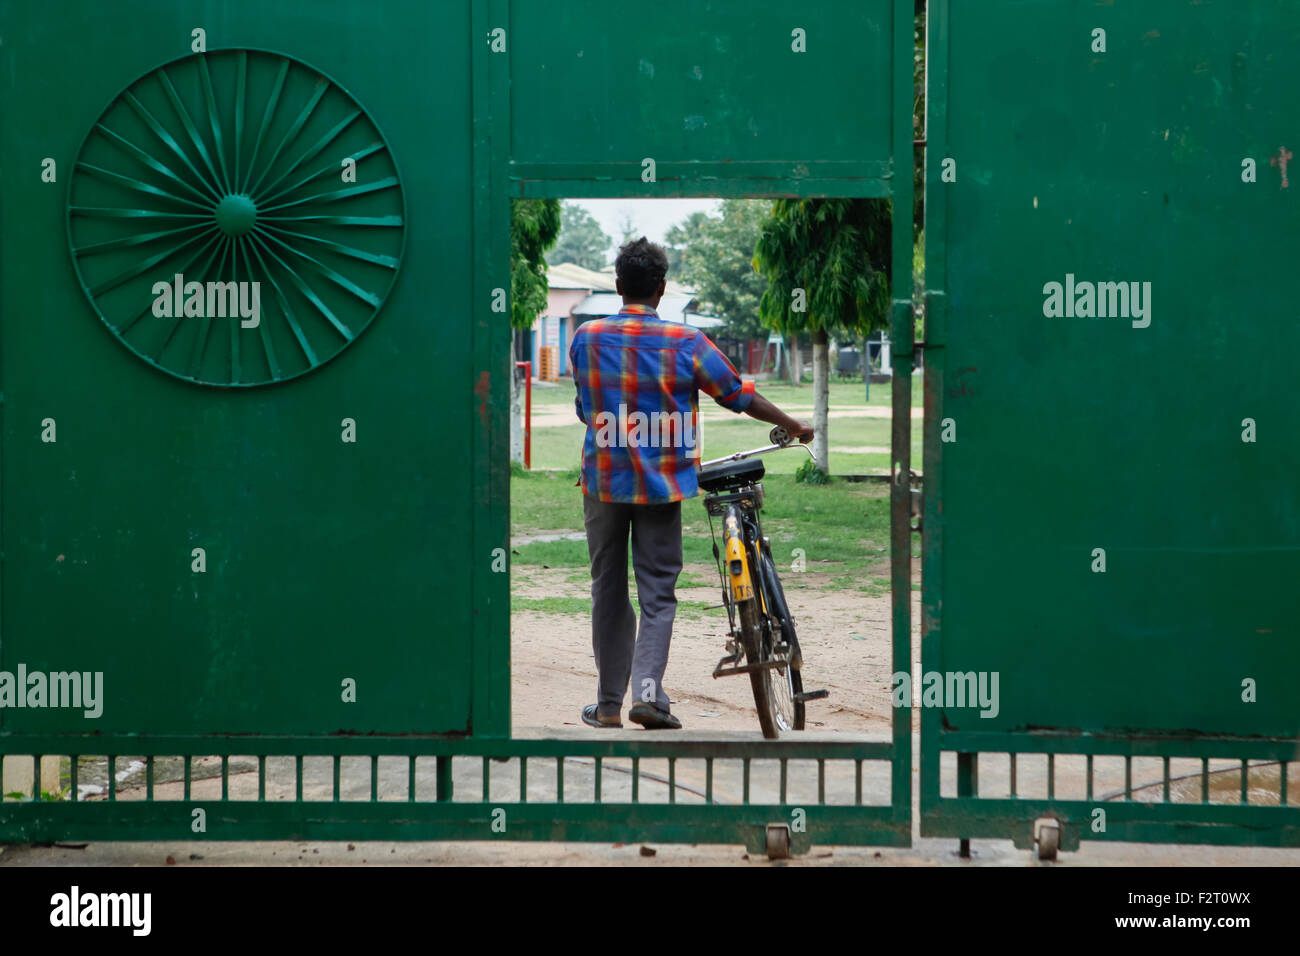 A man carries bicycle as he is entering Sujata Academy complex, which is a free school and dormitory for rural children in Dungeshwari, Bihar, India. Stock Photo